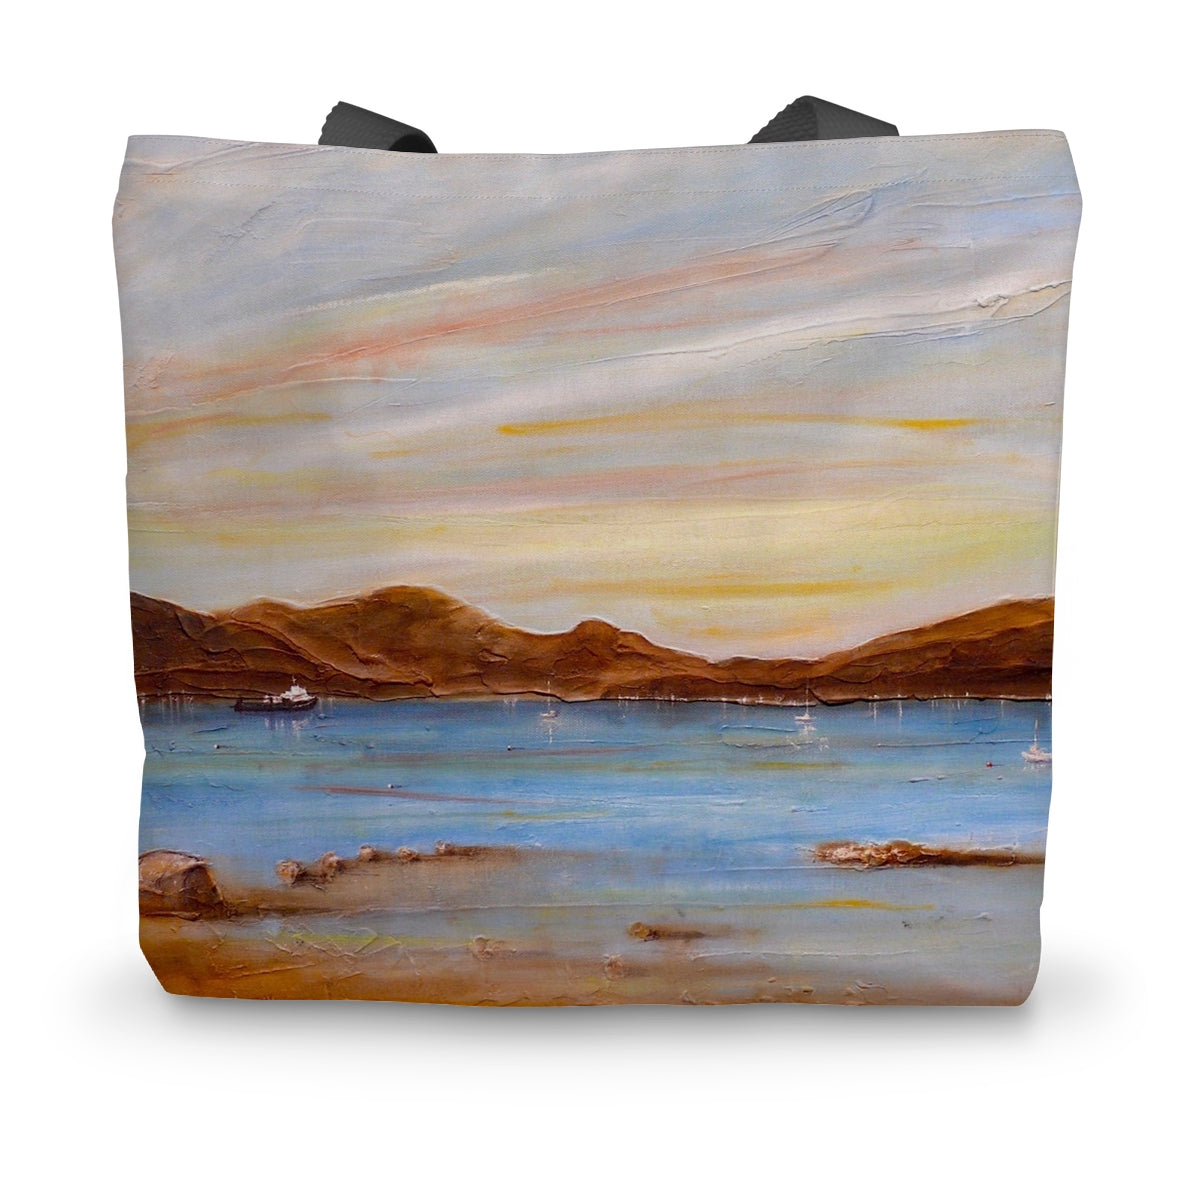 The Last Ferry To Dunoon Art Gifts Canvas Tote Bag-Bags-River Clyde Art Gallery-14"x18.5"-Paintings, Prints, Homeware, Art Gifts From Scotland By Scottish Artist Kevin Hunter